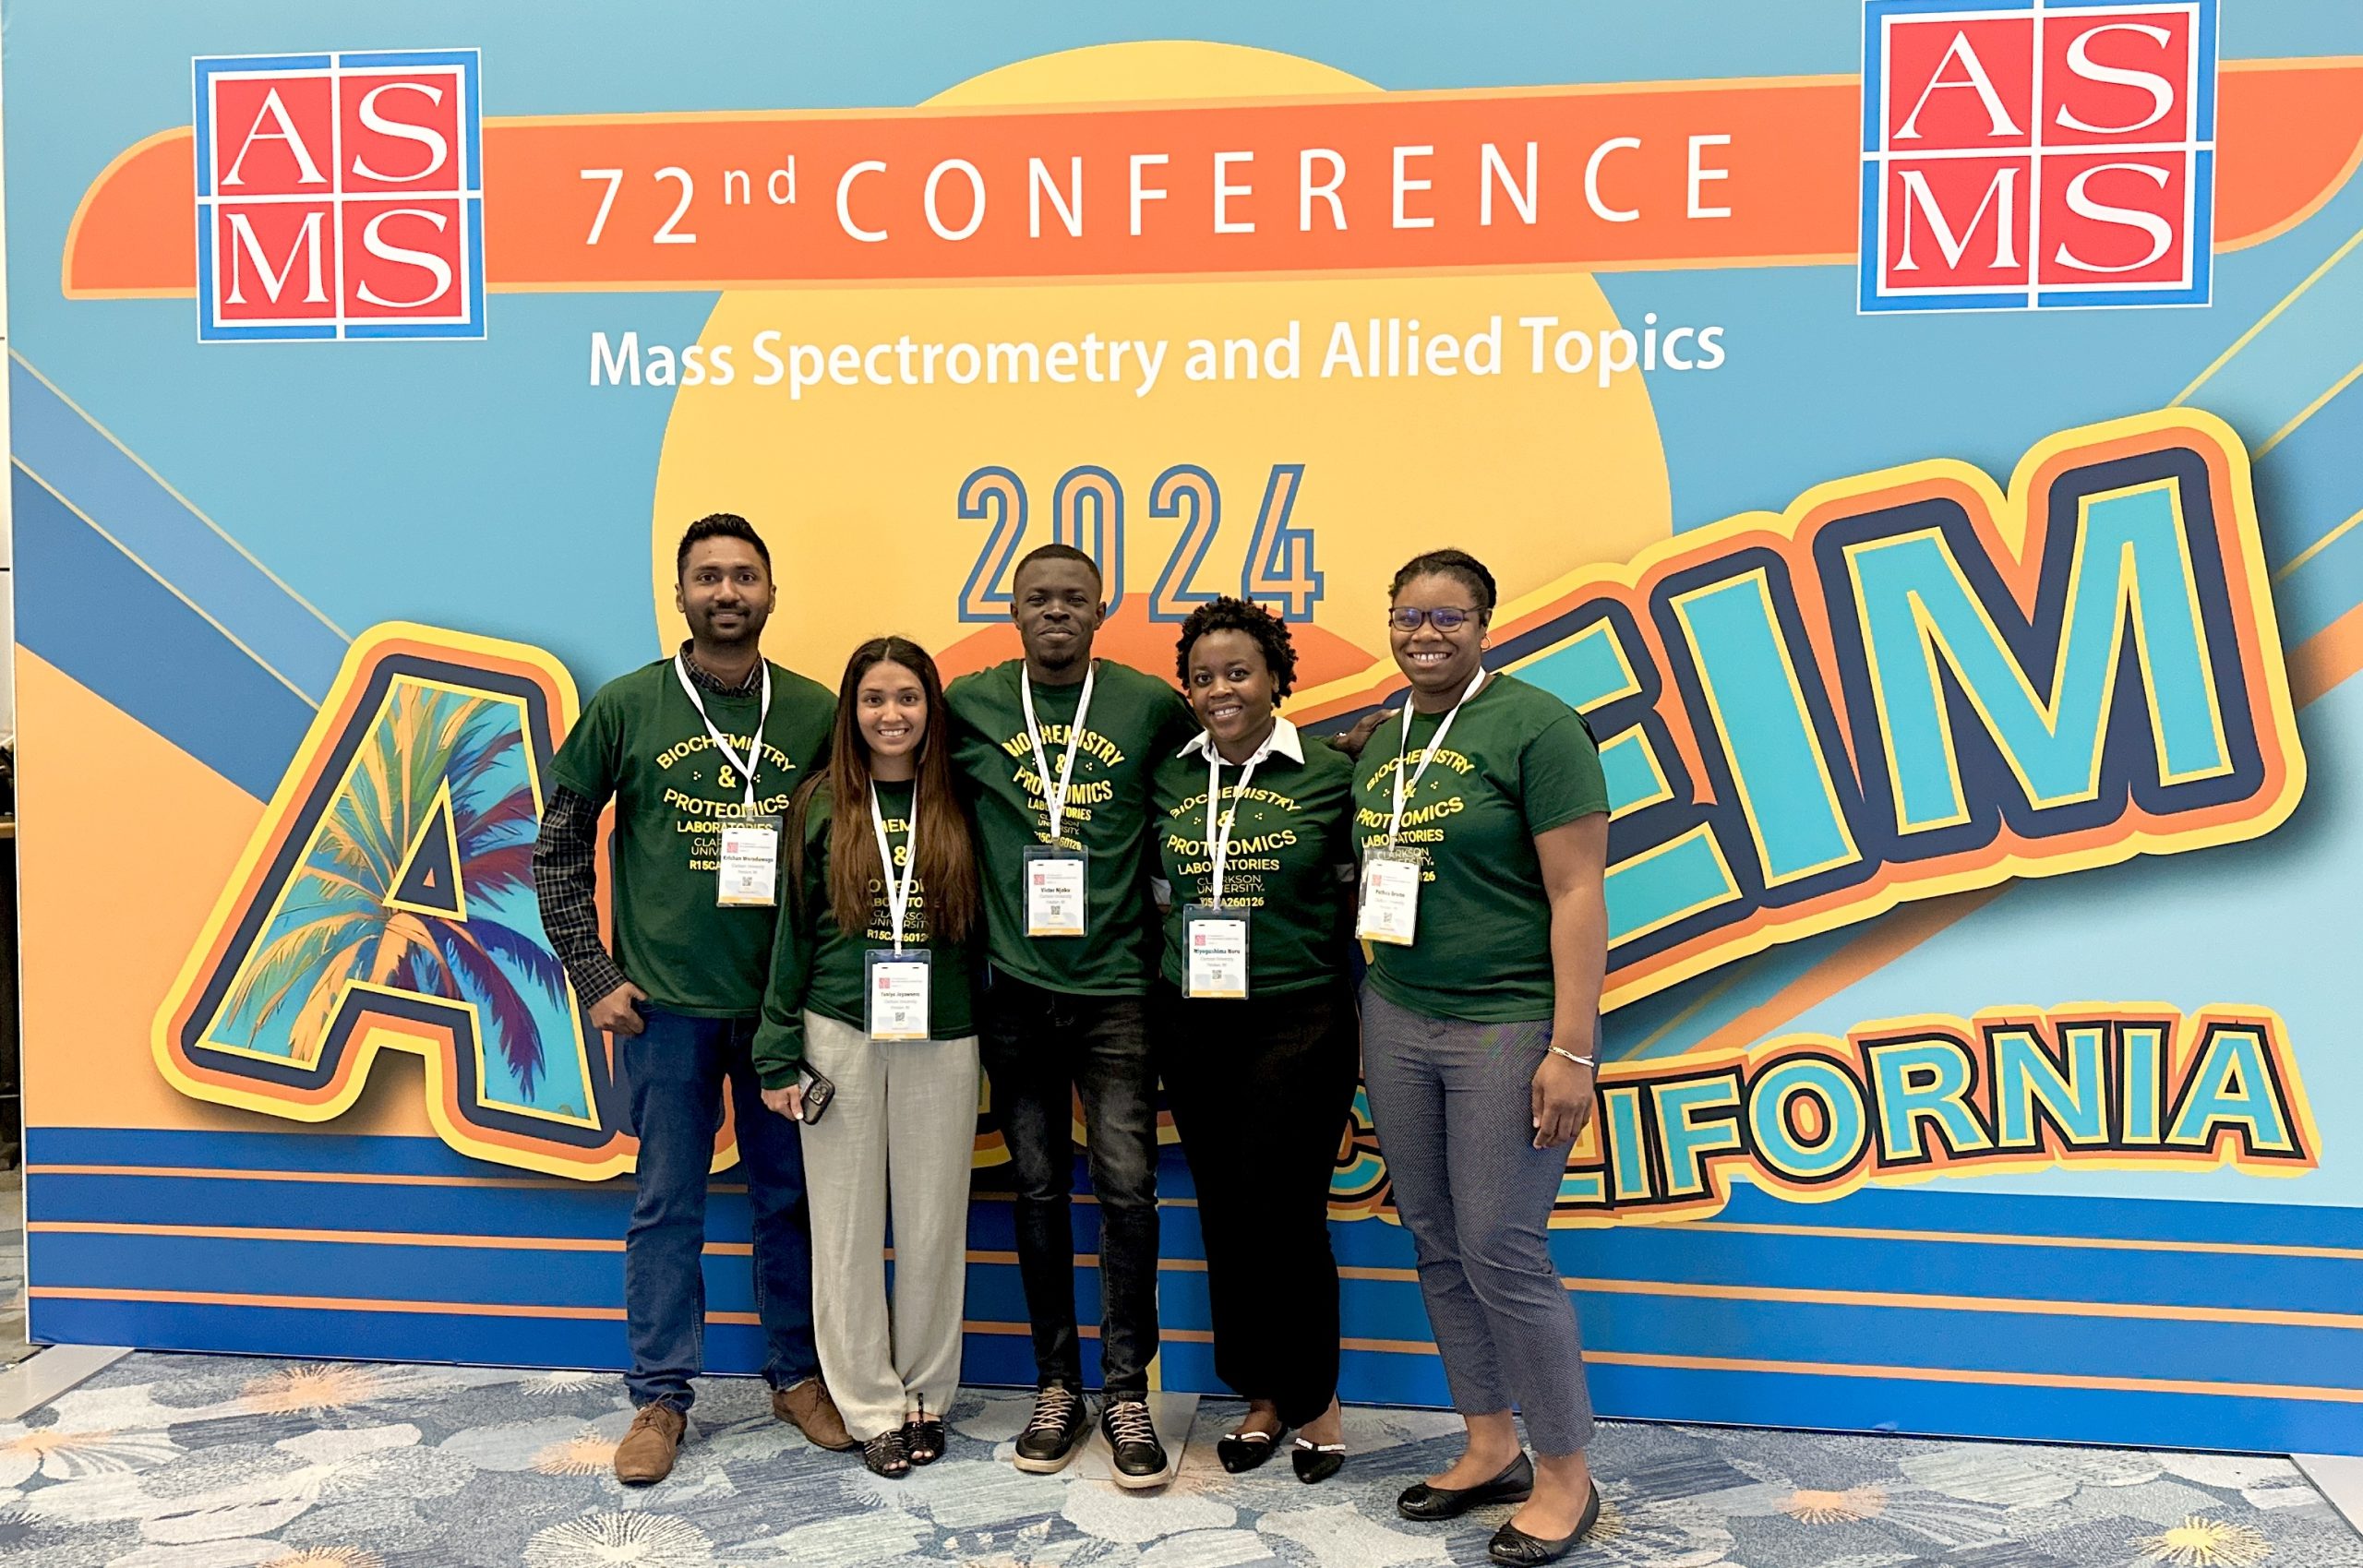 Members of the Biochemistry and Proteomics Laboratories from Clarkson University Attend the American Society for Mass Spectrometry International Conference